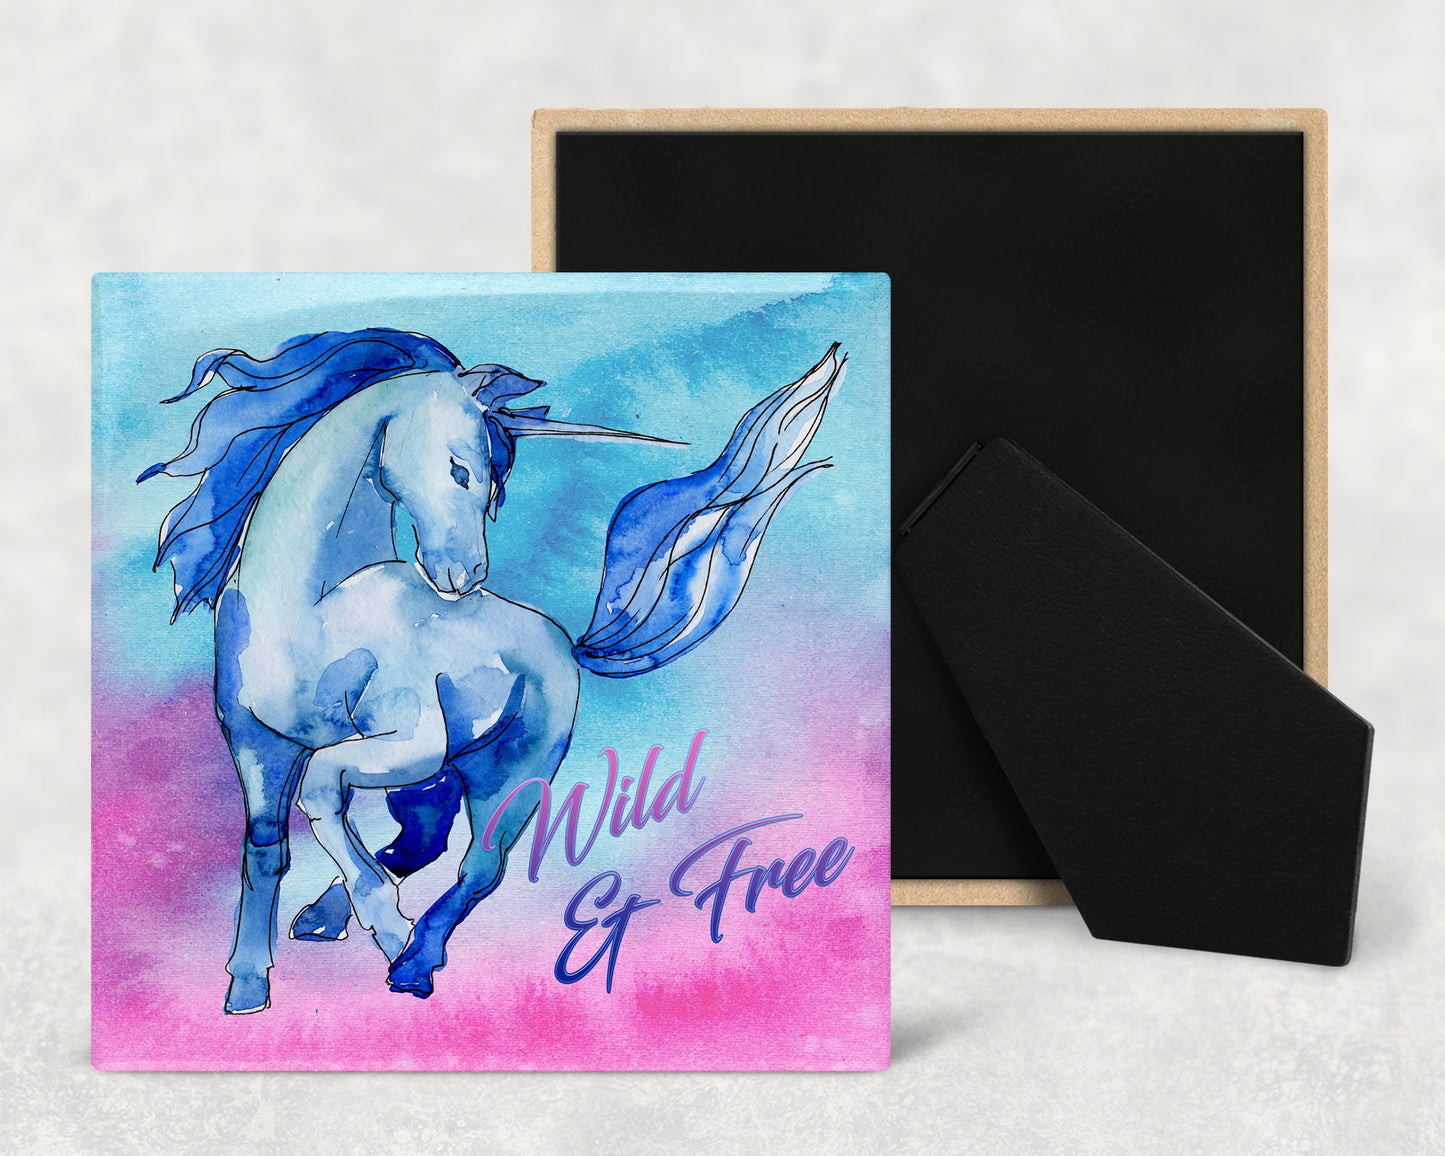 Wild & Free Unicorn Art Decorative Ceramic Tile with Optional Easel Back - Available in 3 Sizes